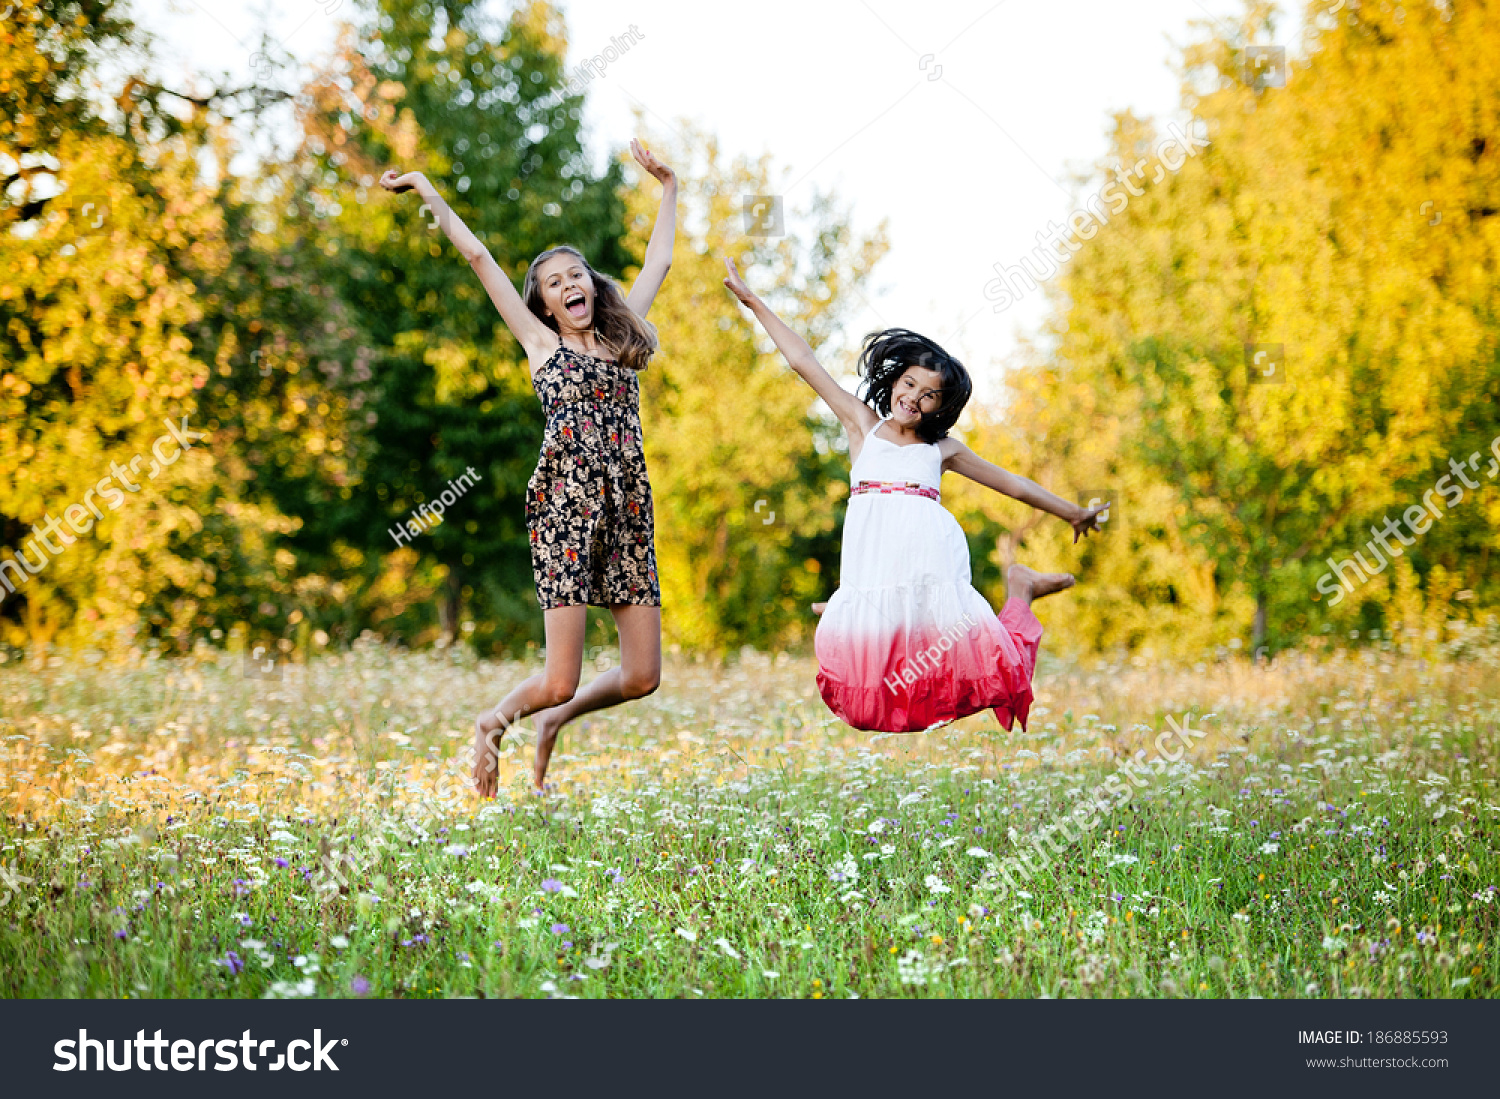 https://image.shutterstock.com/shutterstock/photos/186885593/display_1500/stock-photo-two-sisters-laughing-and-playing-in-green-sunny-park-186885593.jpg